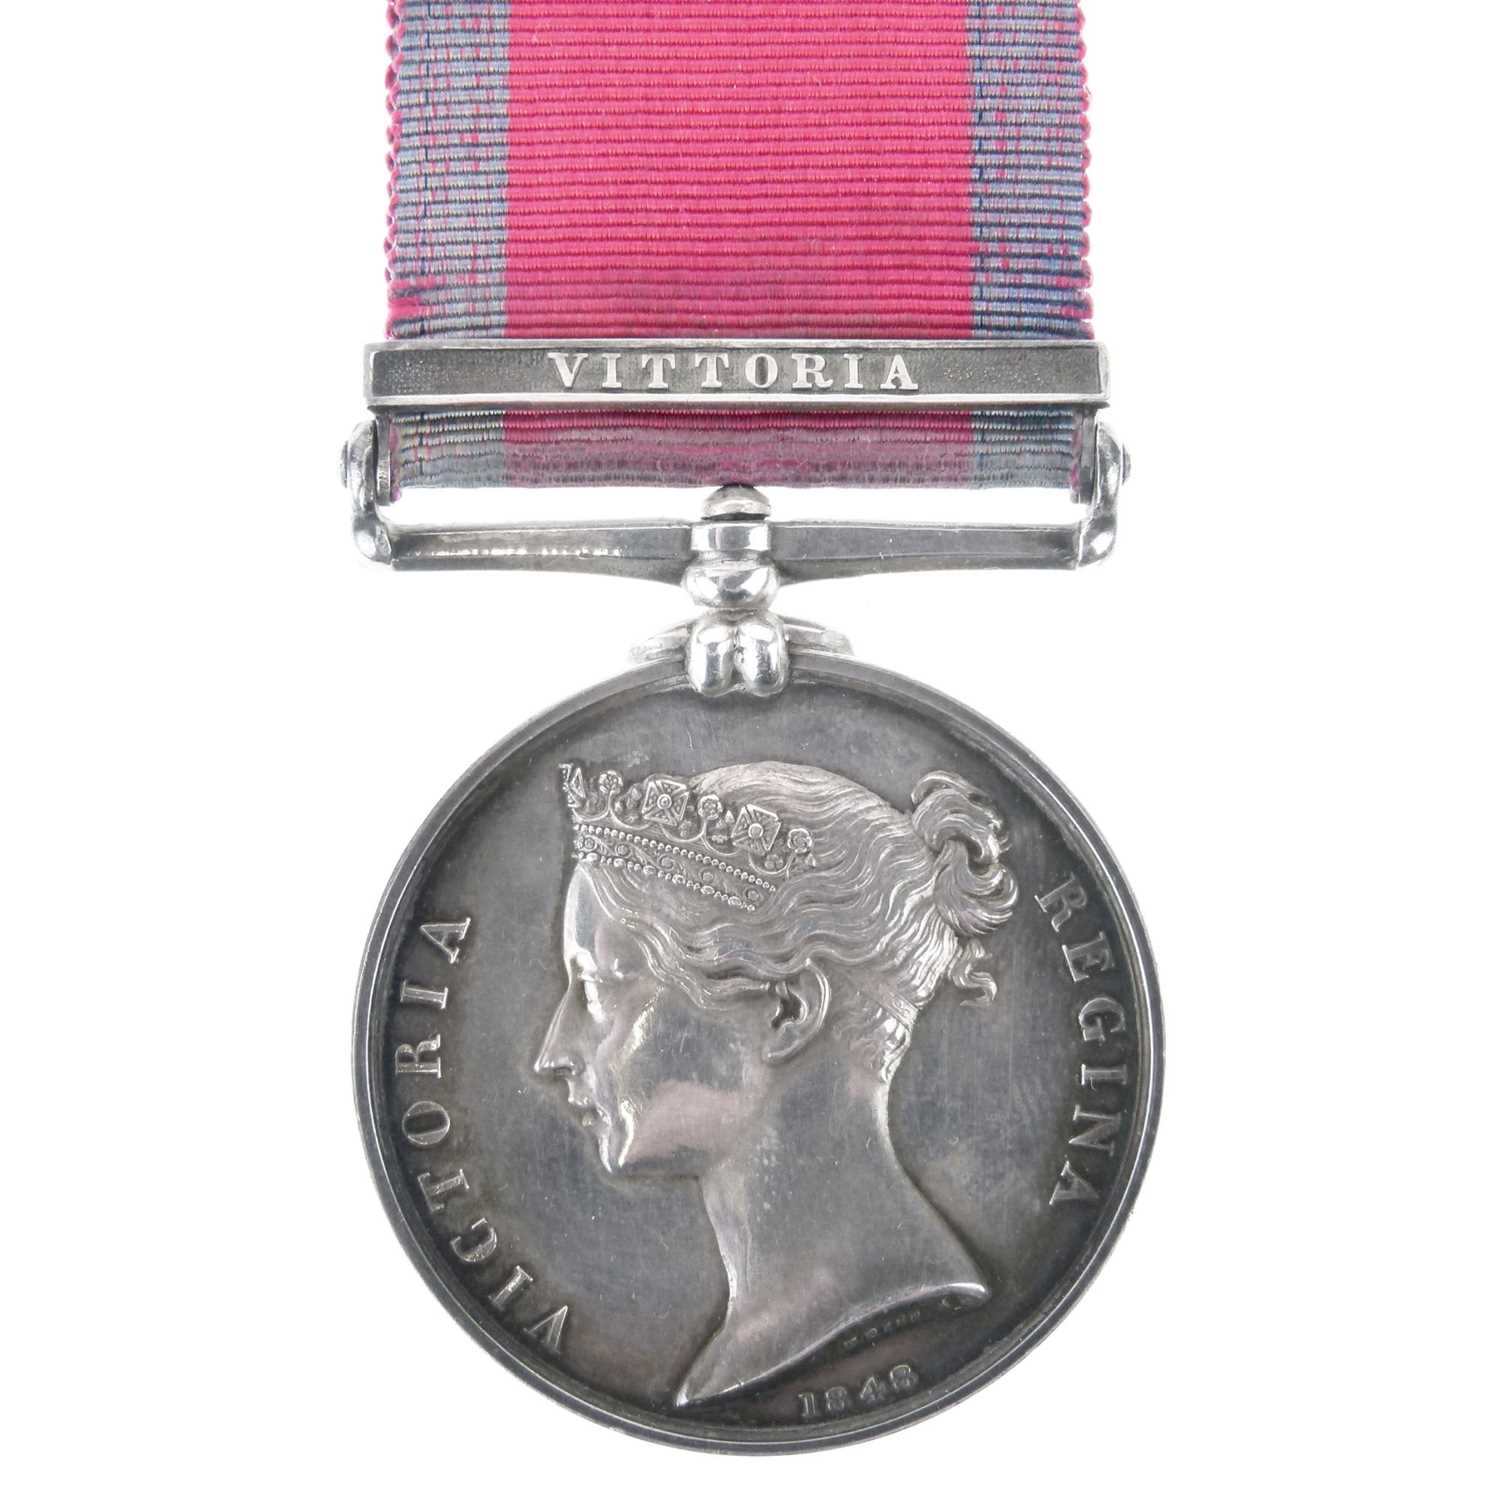 Lot 225 - Military General Service Medal, 1793-1814, together with a silhouette